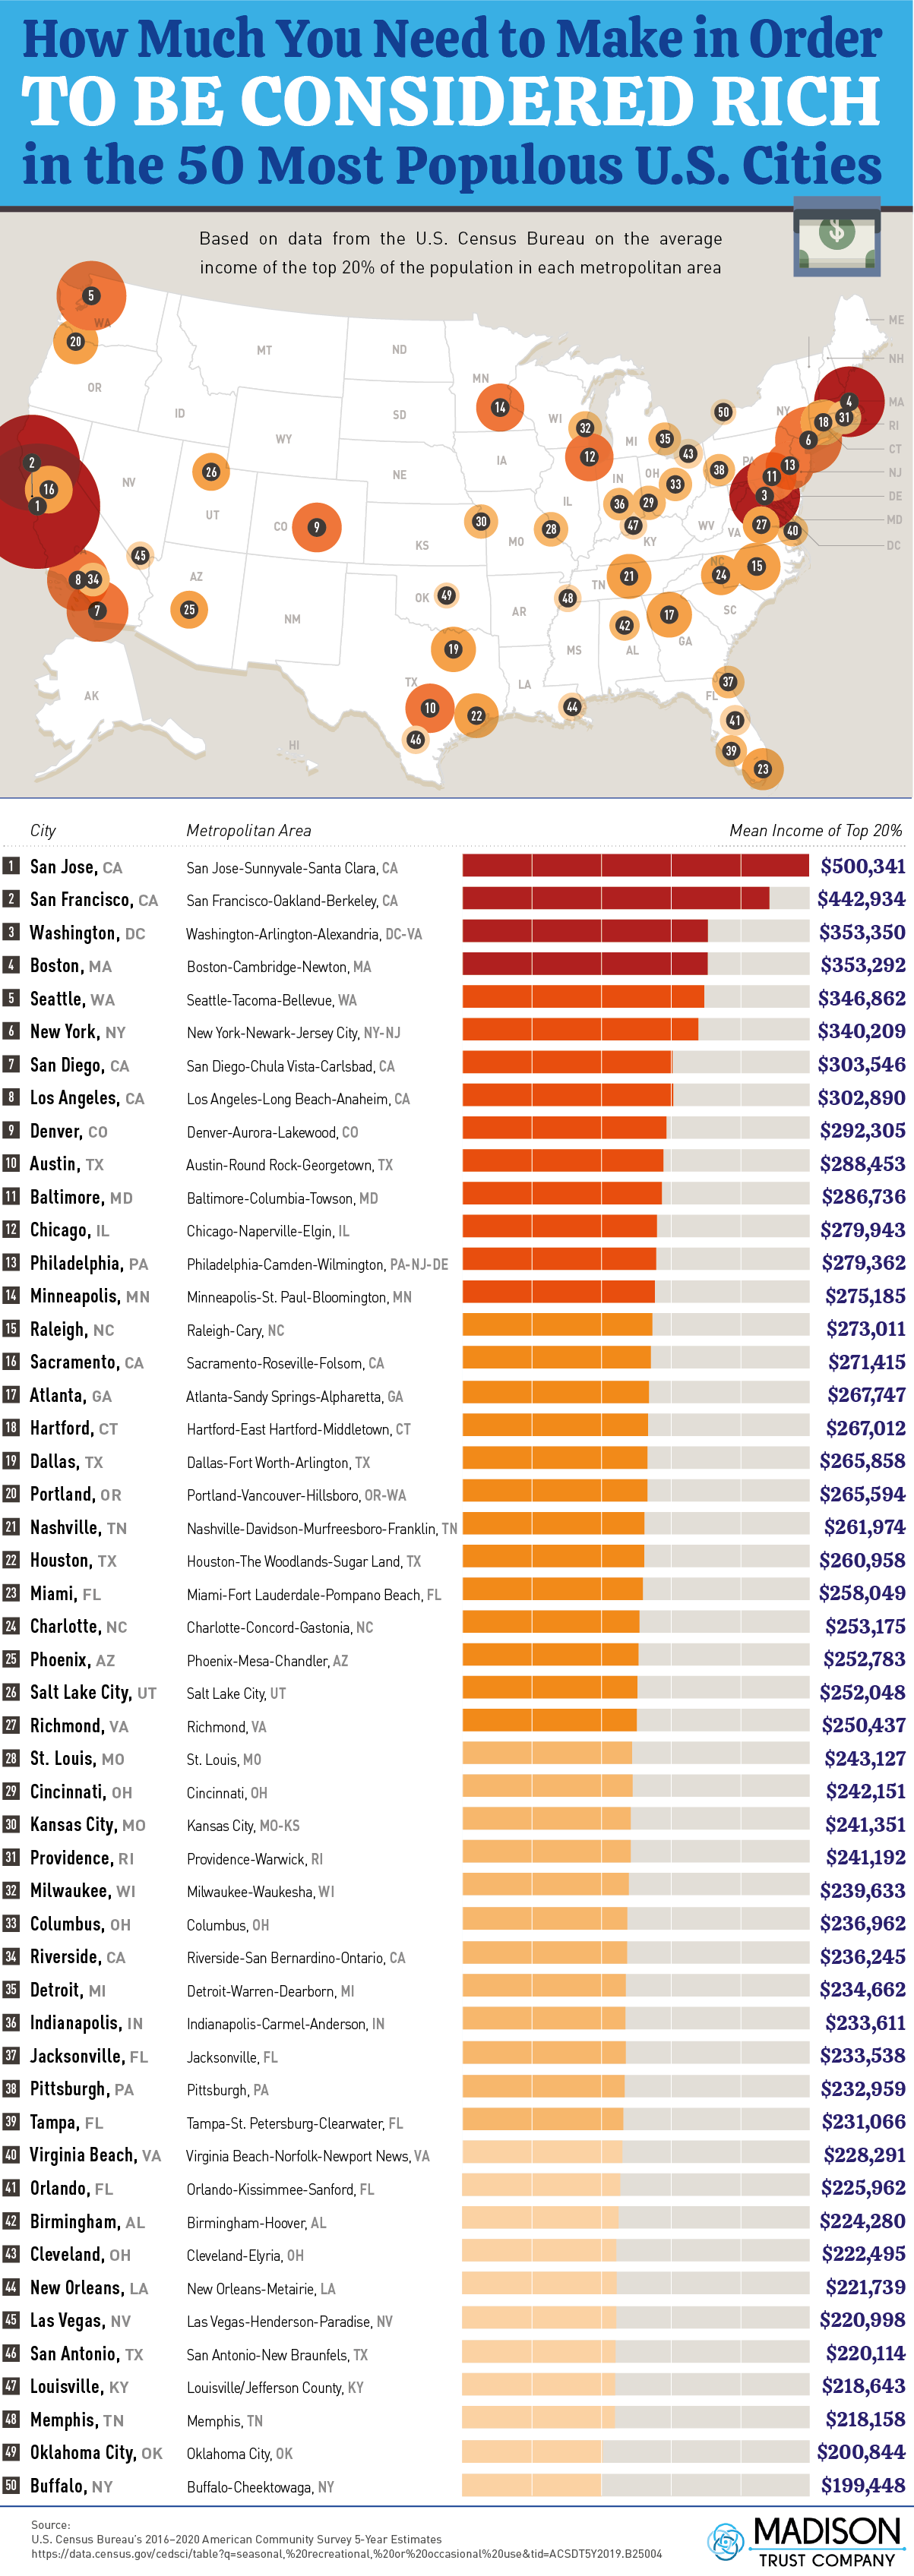 How Much You Need to Make in Order to Be Considered Rich in the 50 Most Populous U.S. Cities #Infographic